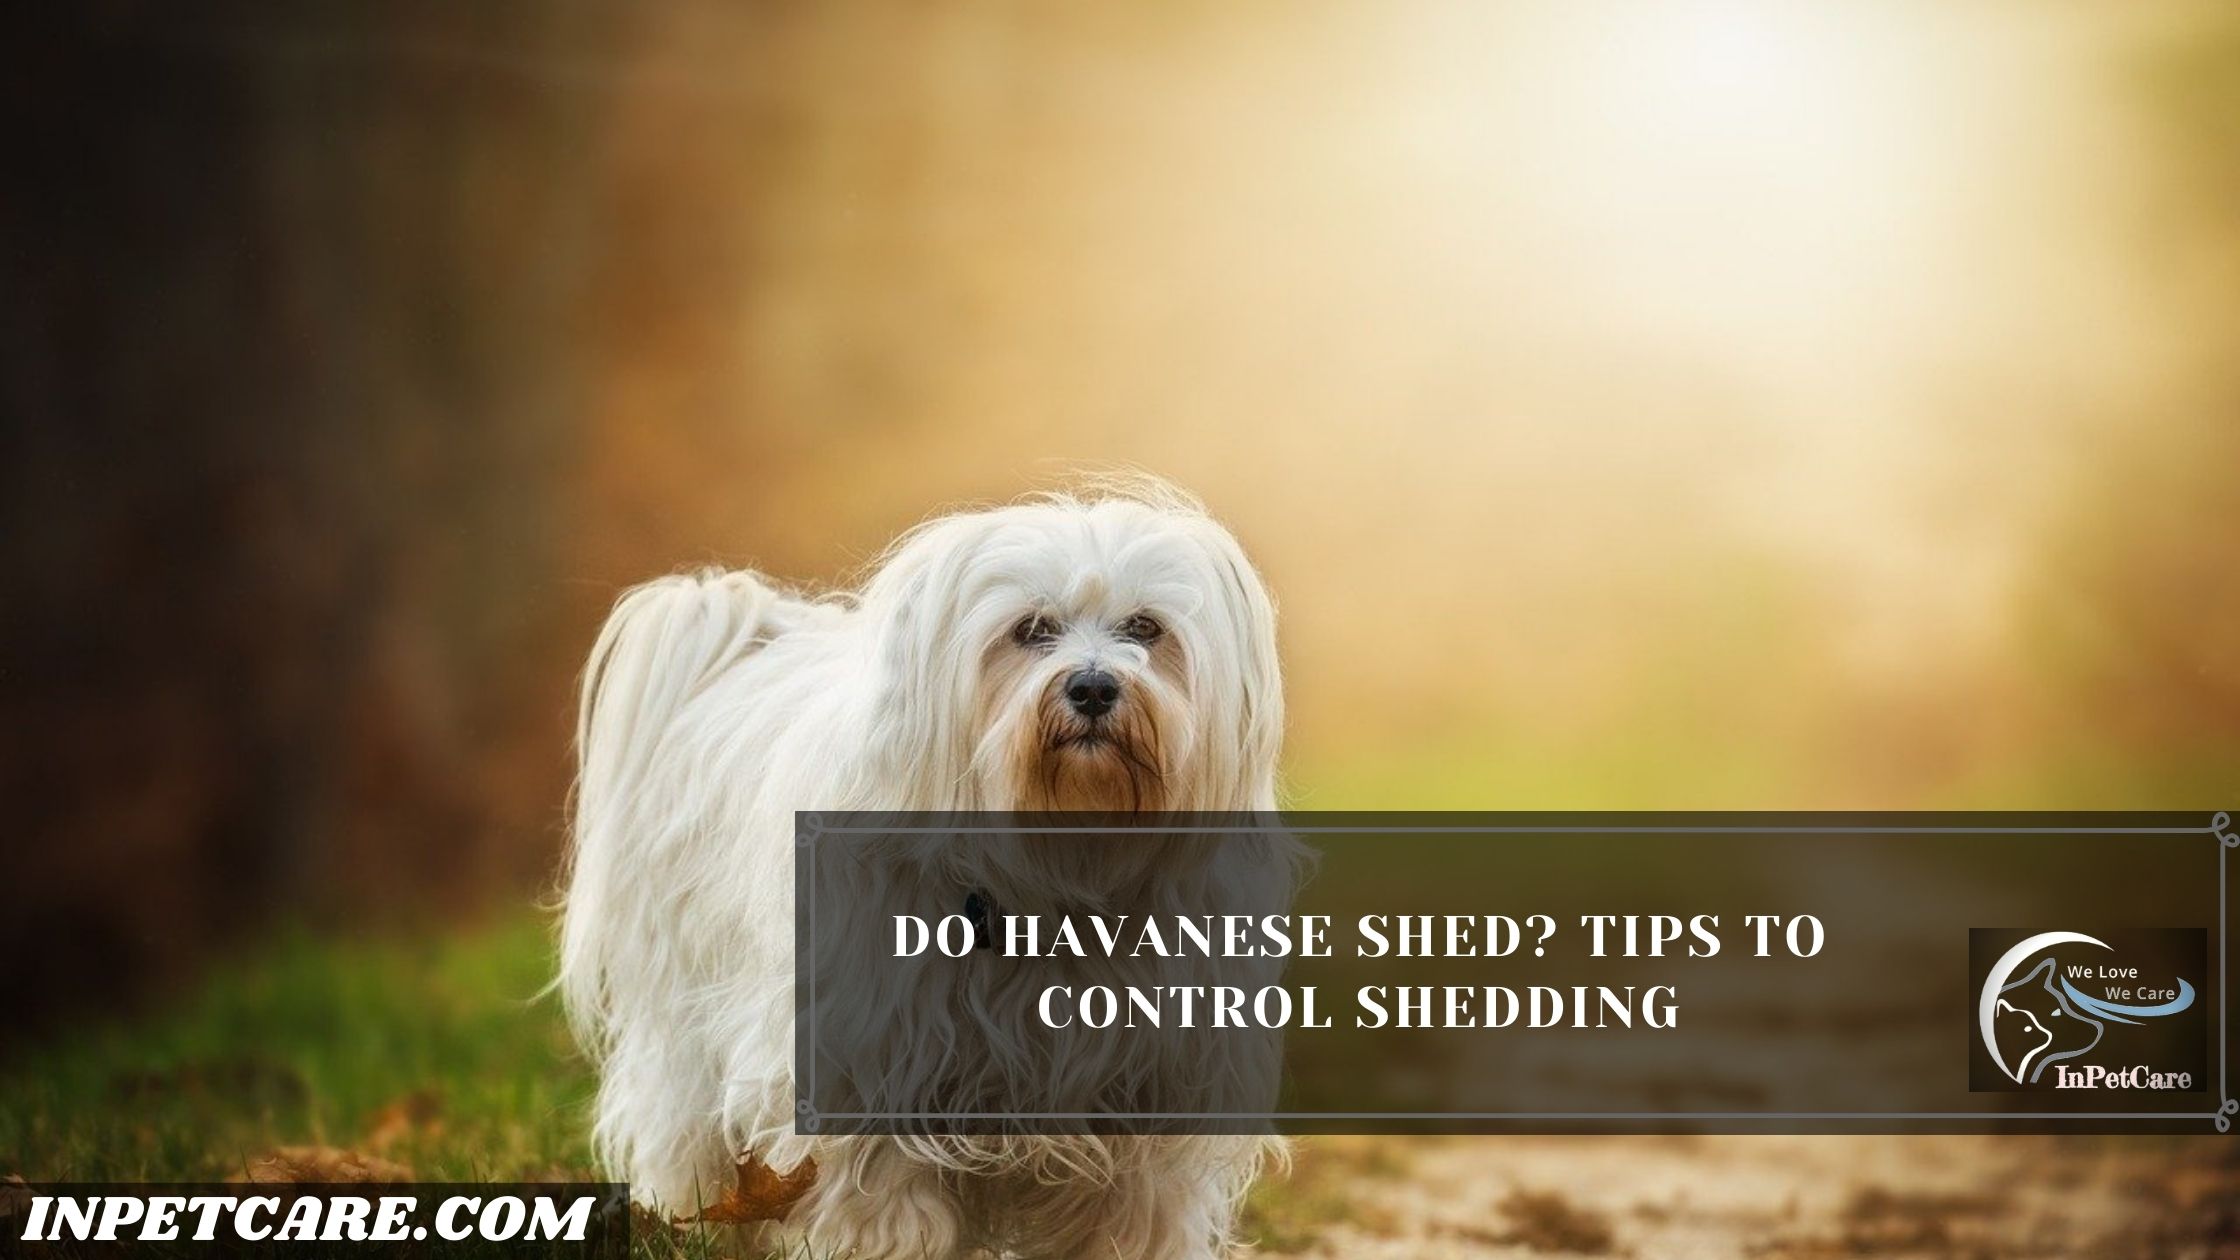 Do Havanese Shed? Tips to Control Shedding